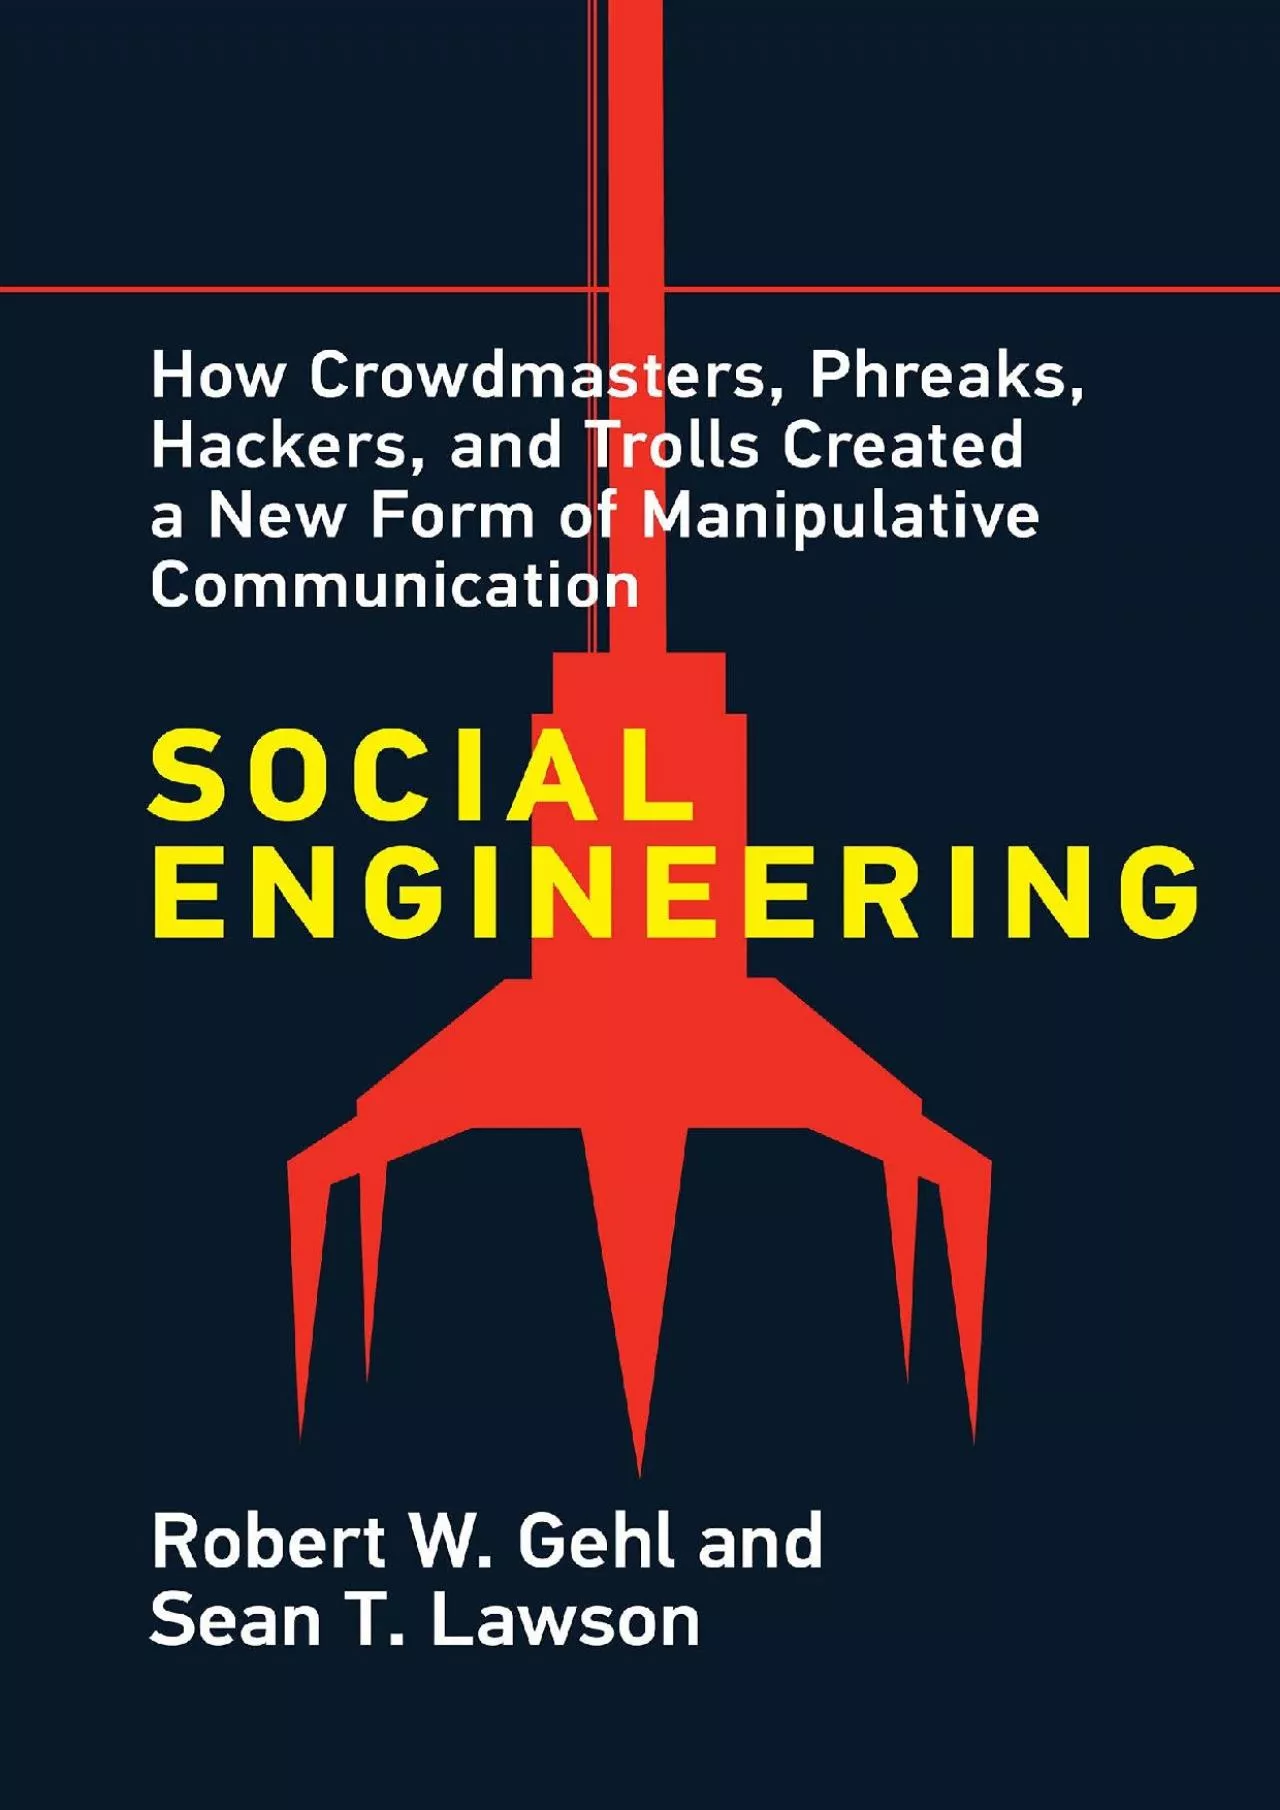 (BOOK)-Social Engineering: How Crowdmasters, Phreaks, Hackers, and Trolls Created a New